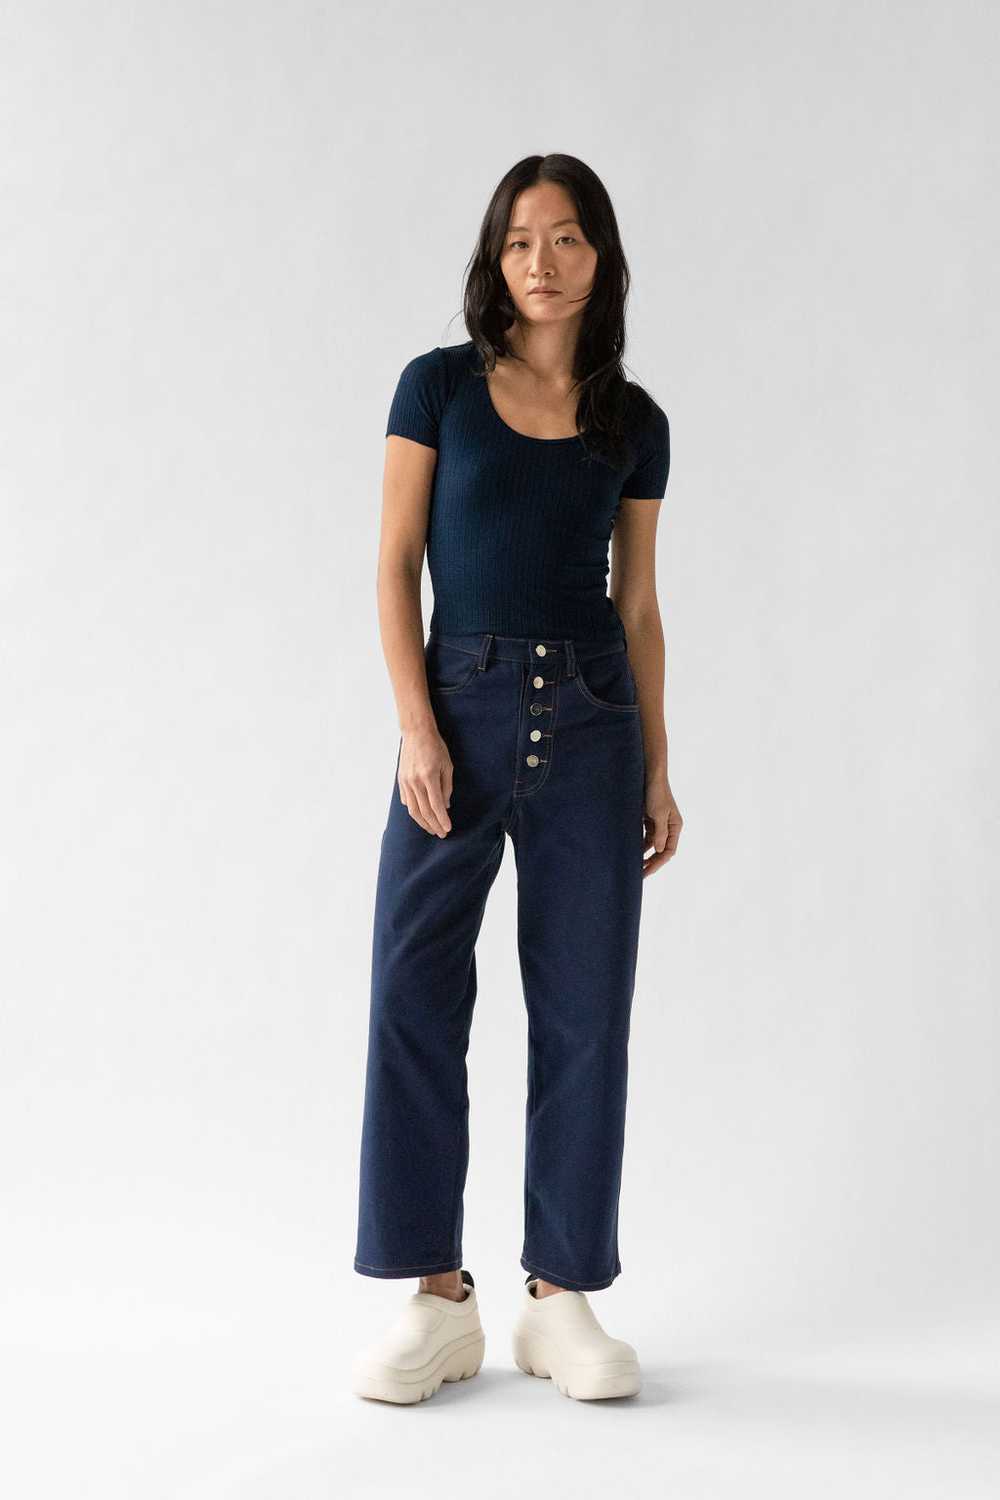 James Street Co. MILL PANT - image 2